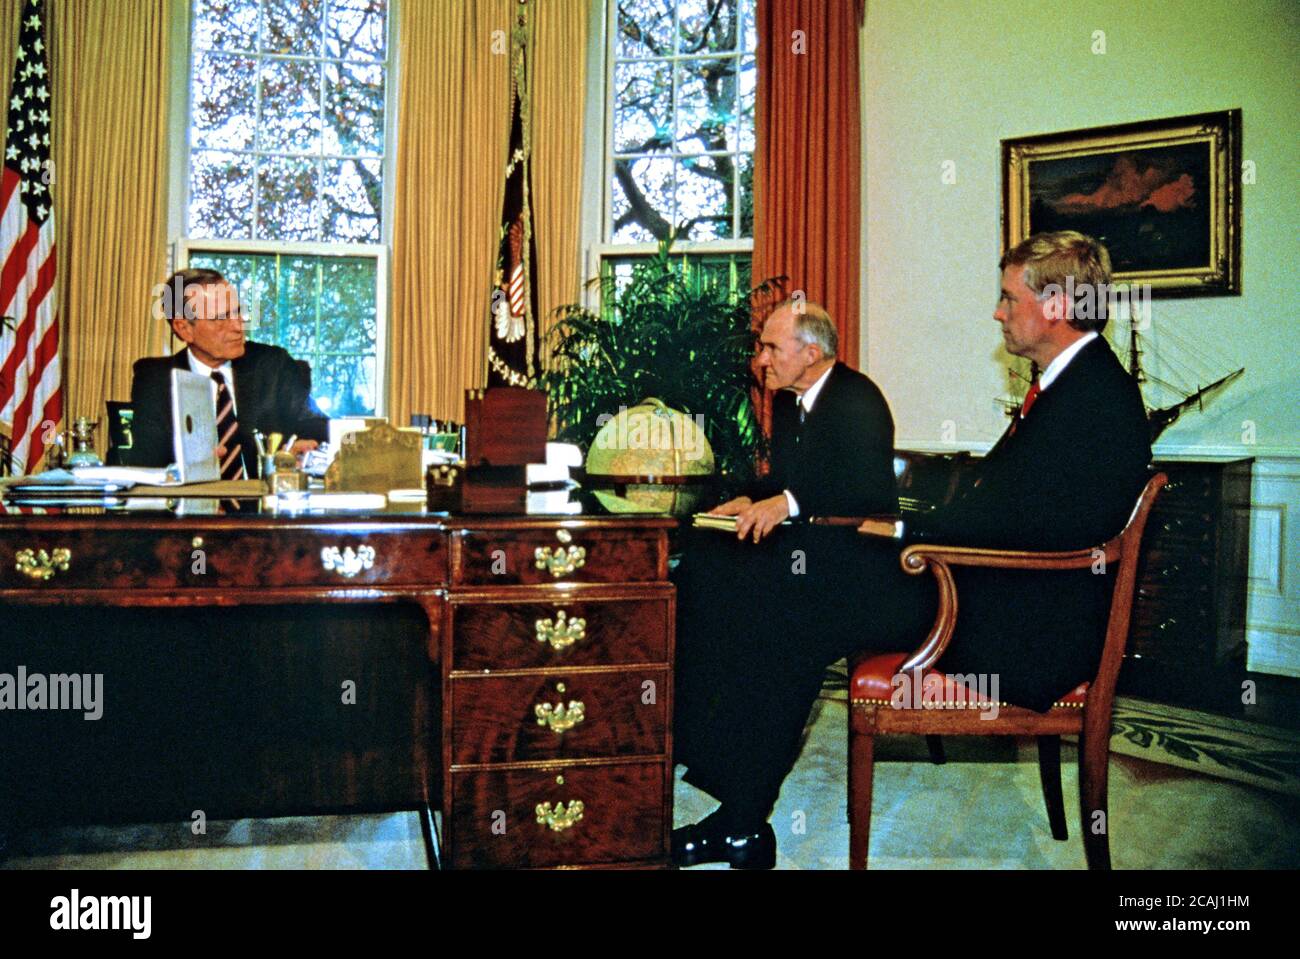 In this file photo, United States President George H.W. Bush meets senior advisors during a briefing on the upcoming Malta Summit with Soviet President Mikhail Gorbachev (not pictured) in the Oval Office of the White House in Washington, DC on November 28, 1889. From left to right: President Bush; National Security Advisor Brent Scowcroft; and U.S. Vice President Dan Quayle.Credit: Arnie Sachs/CNP | usage worldwide Stock Photo